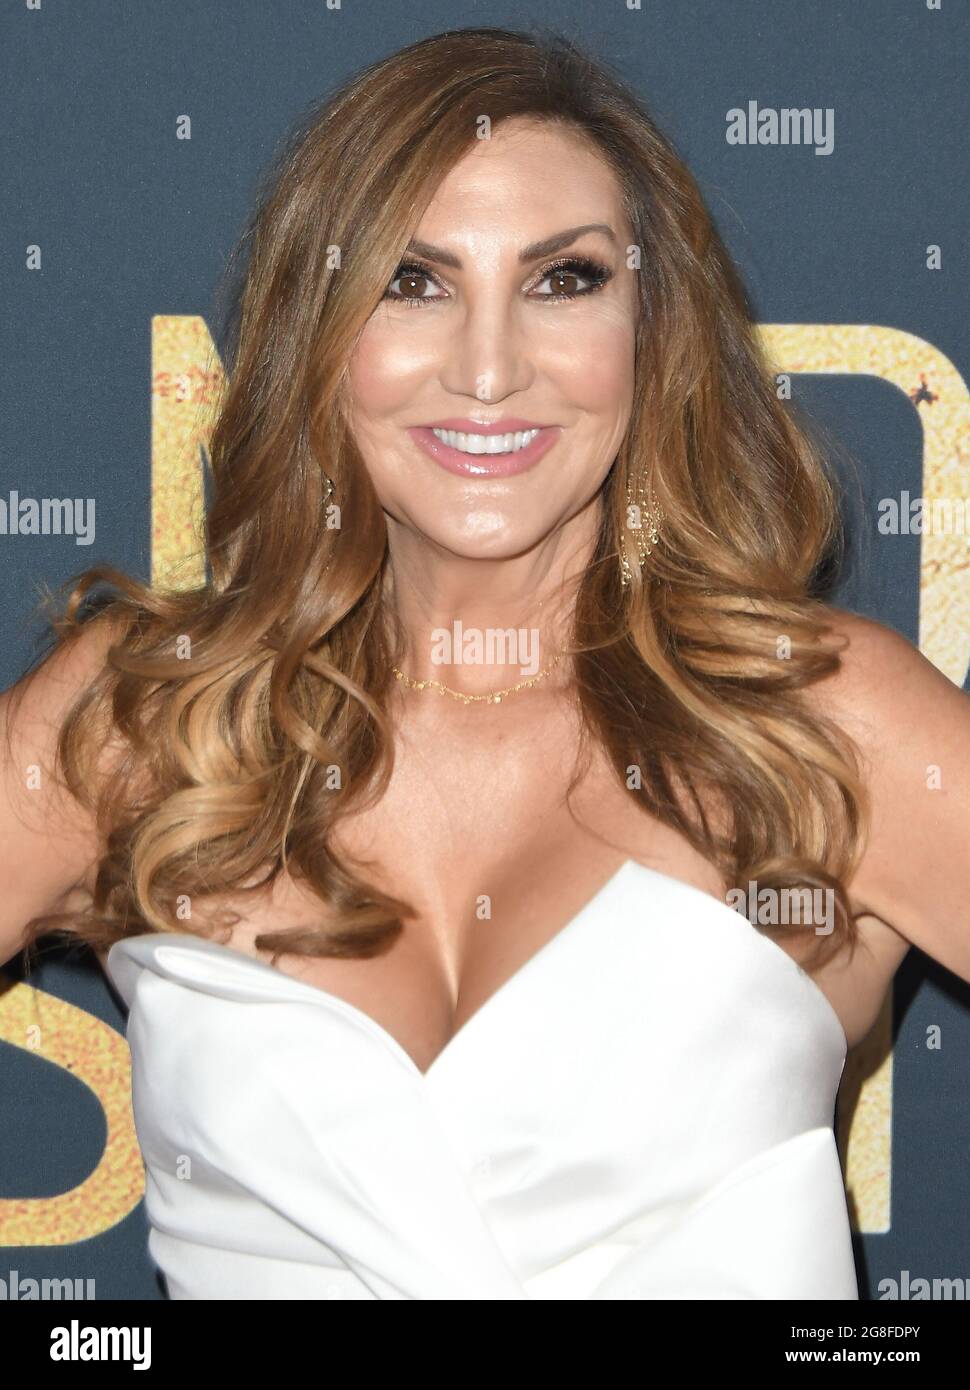 Actress Heather McDonald attends the HBO Luxury Lounge in honor of News  Photo - Getty Images